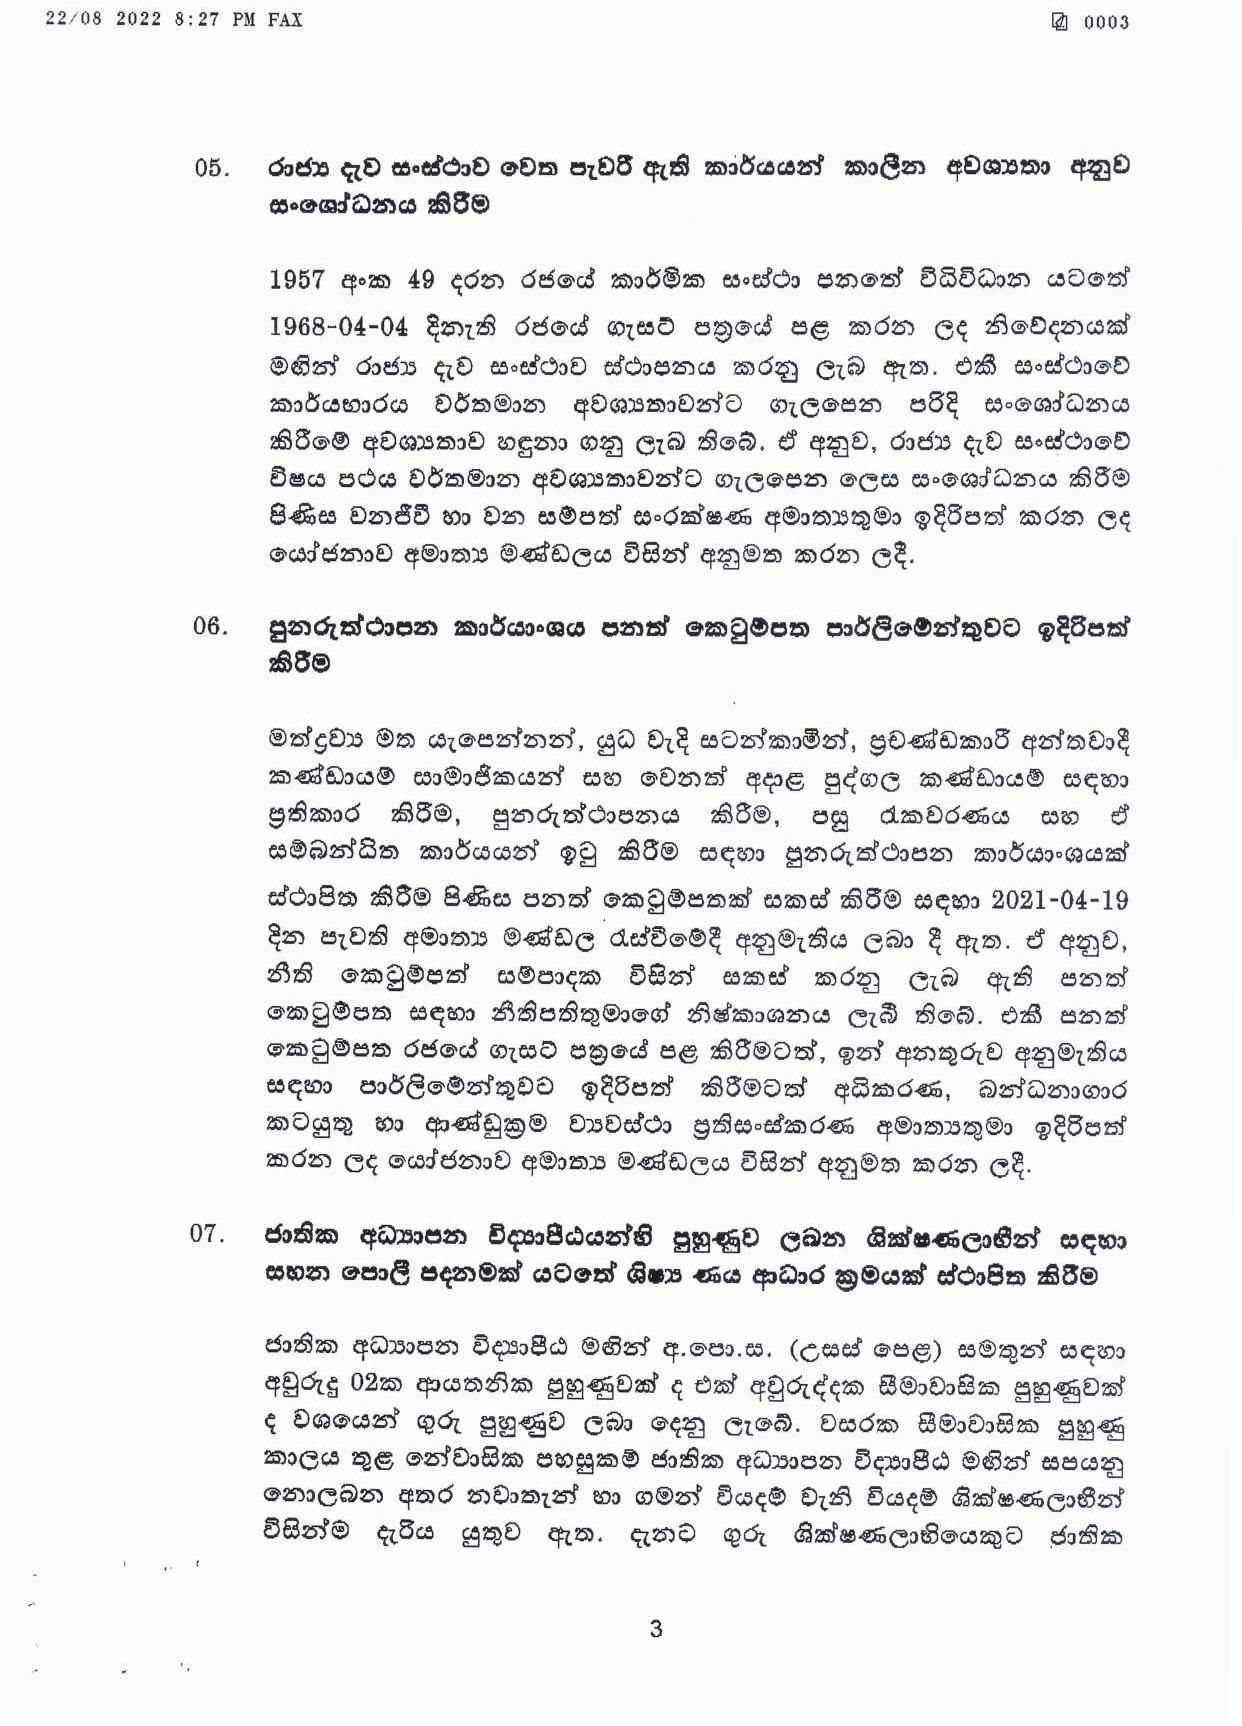 Cabinet decision on 22.08.2022 page 003